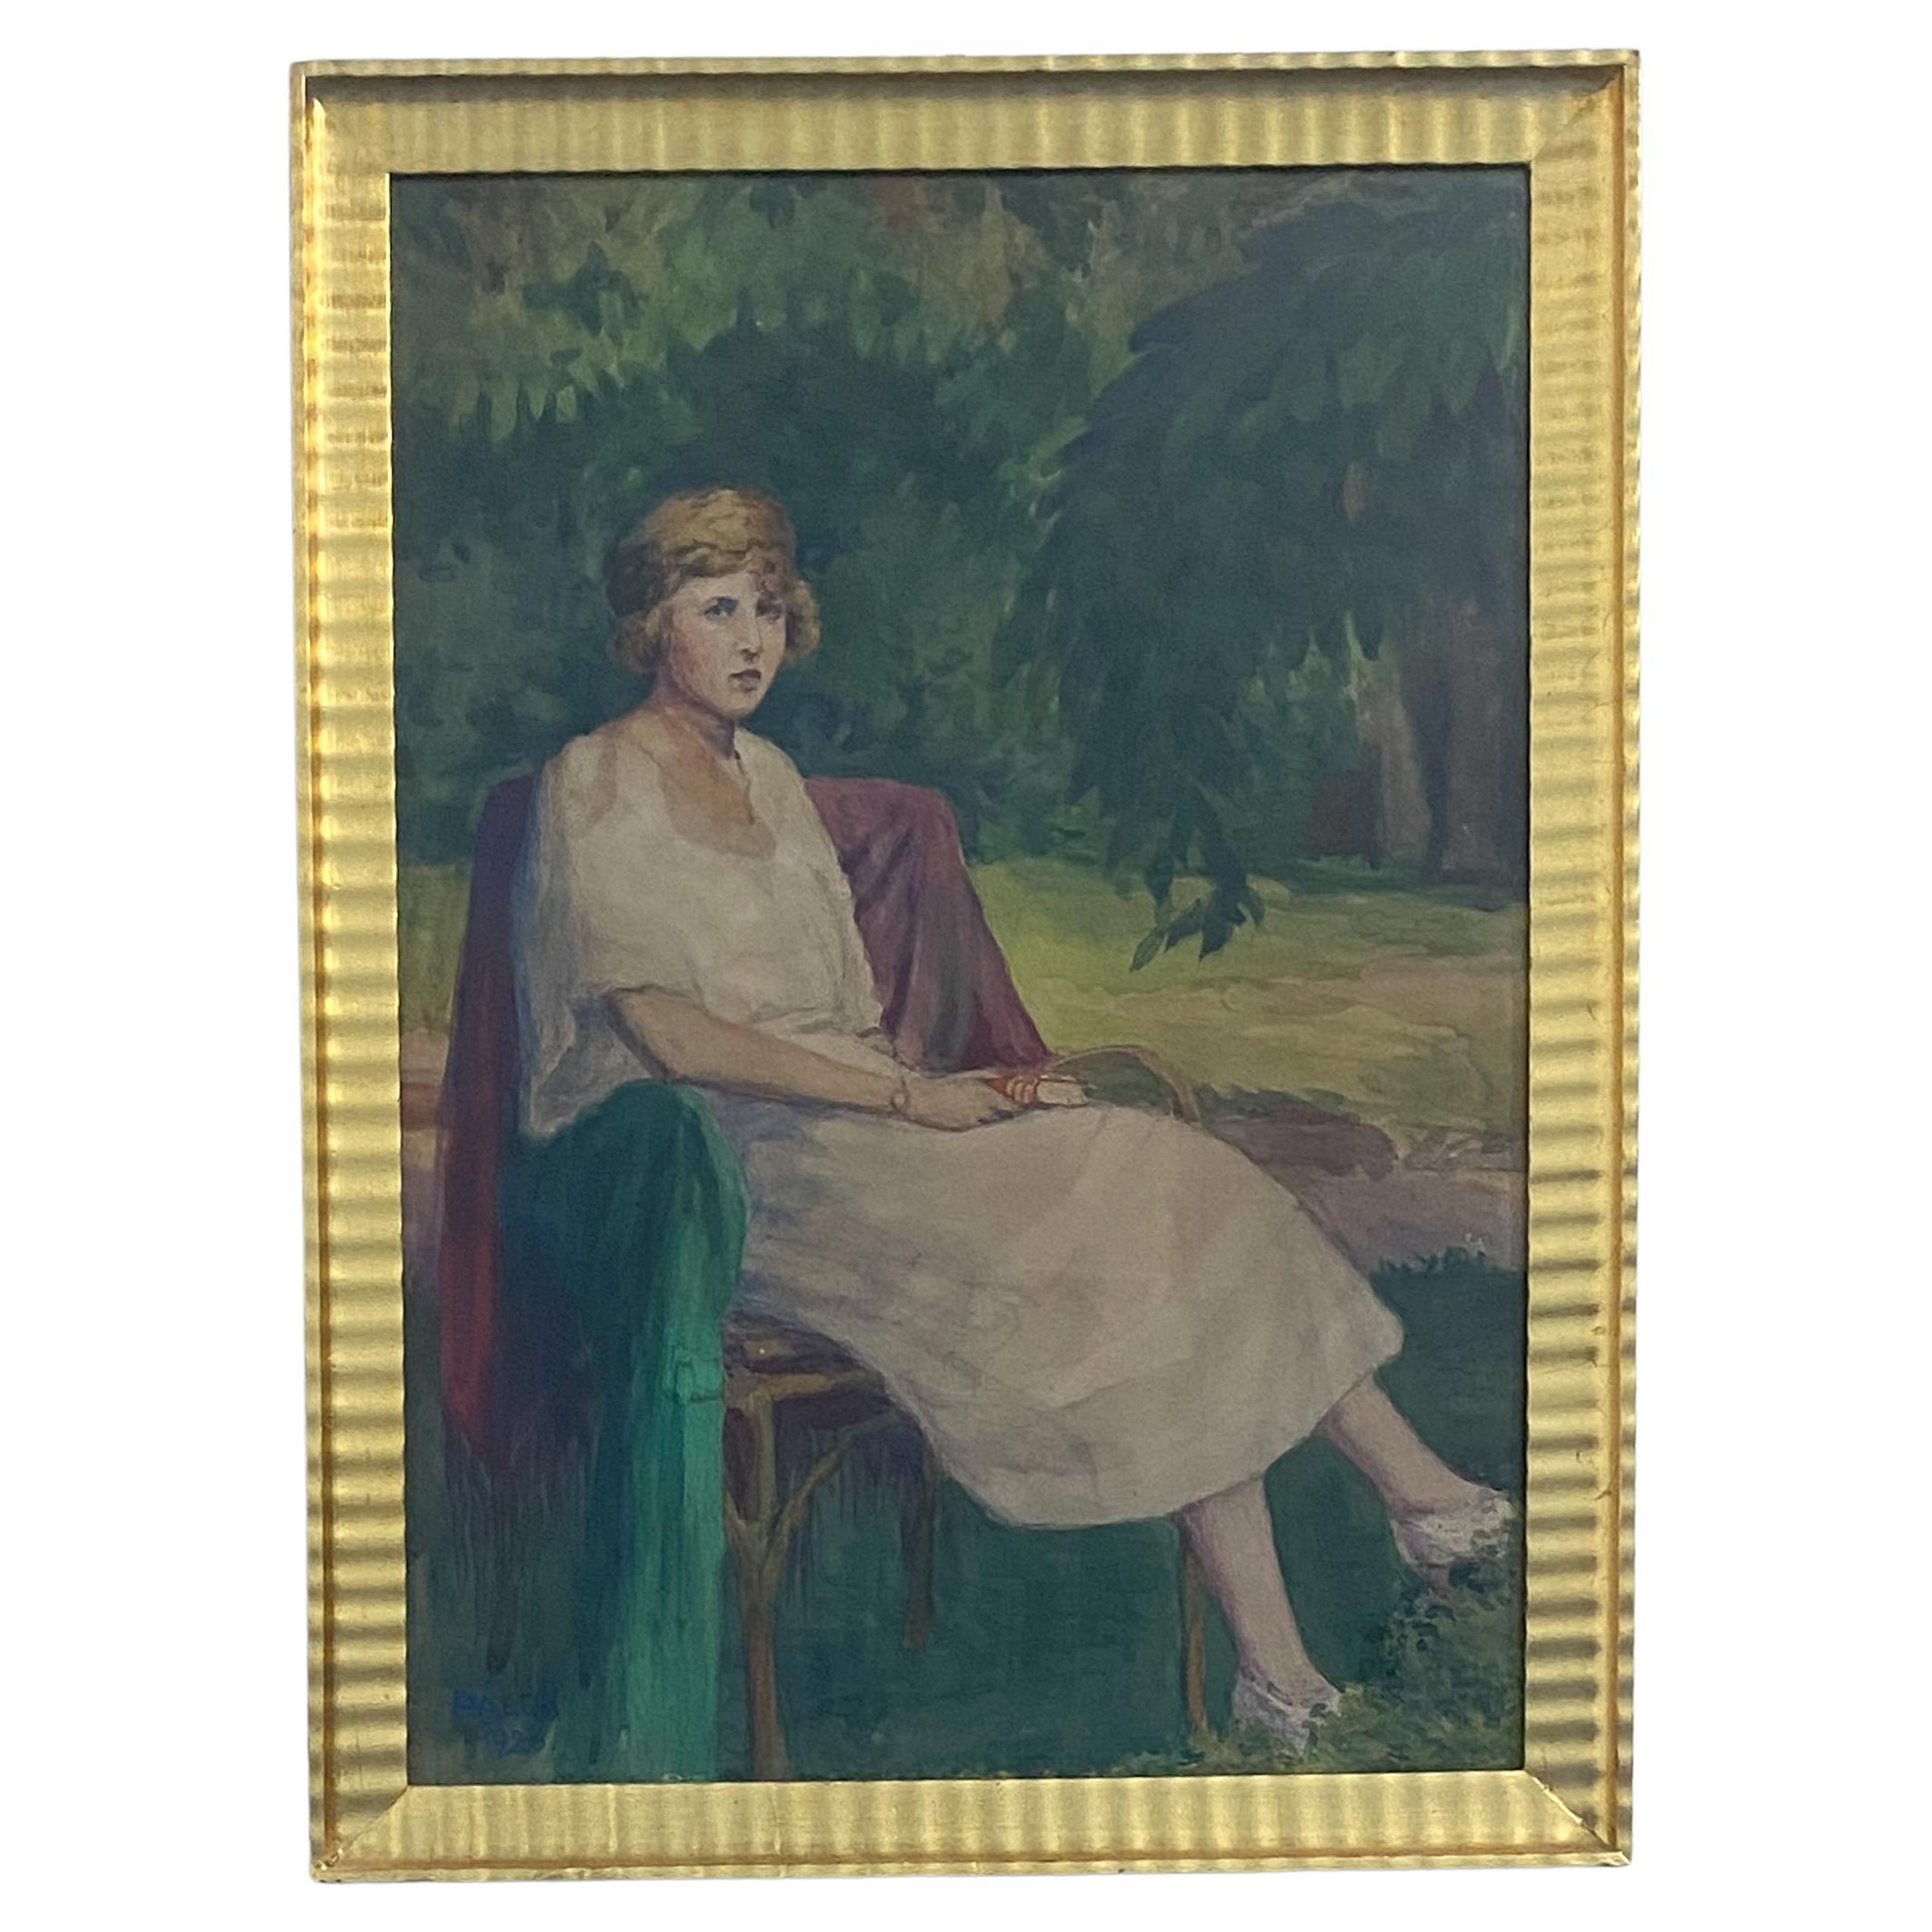 Antique watercolor painting "Woman in the Garden" executed by Palla Jeno in 1920